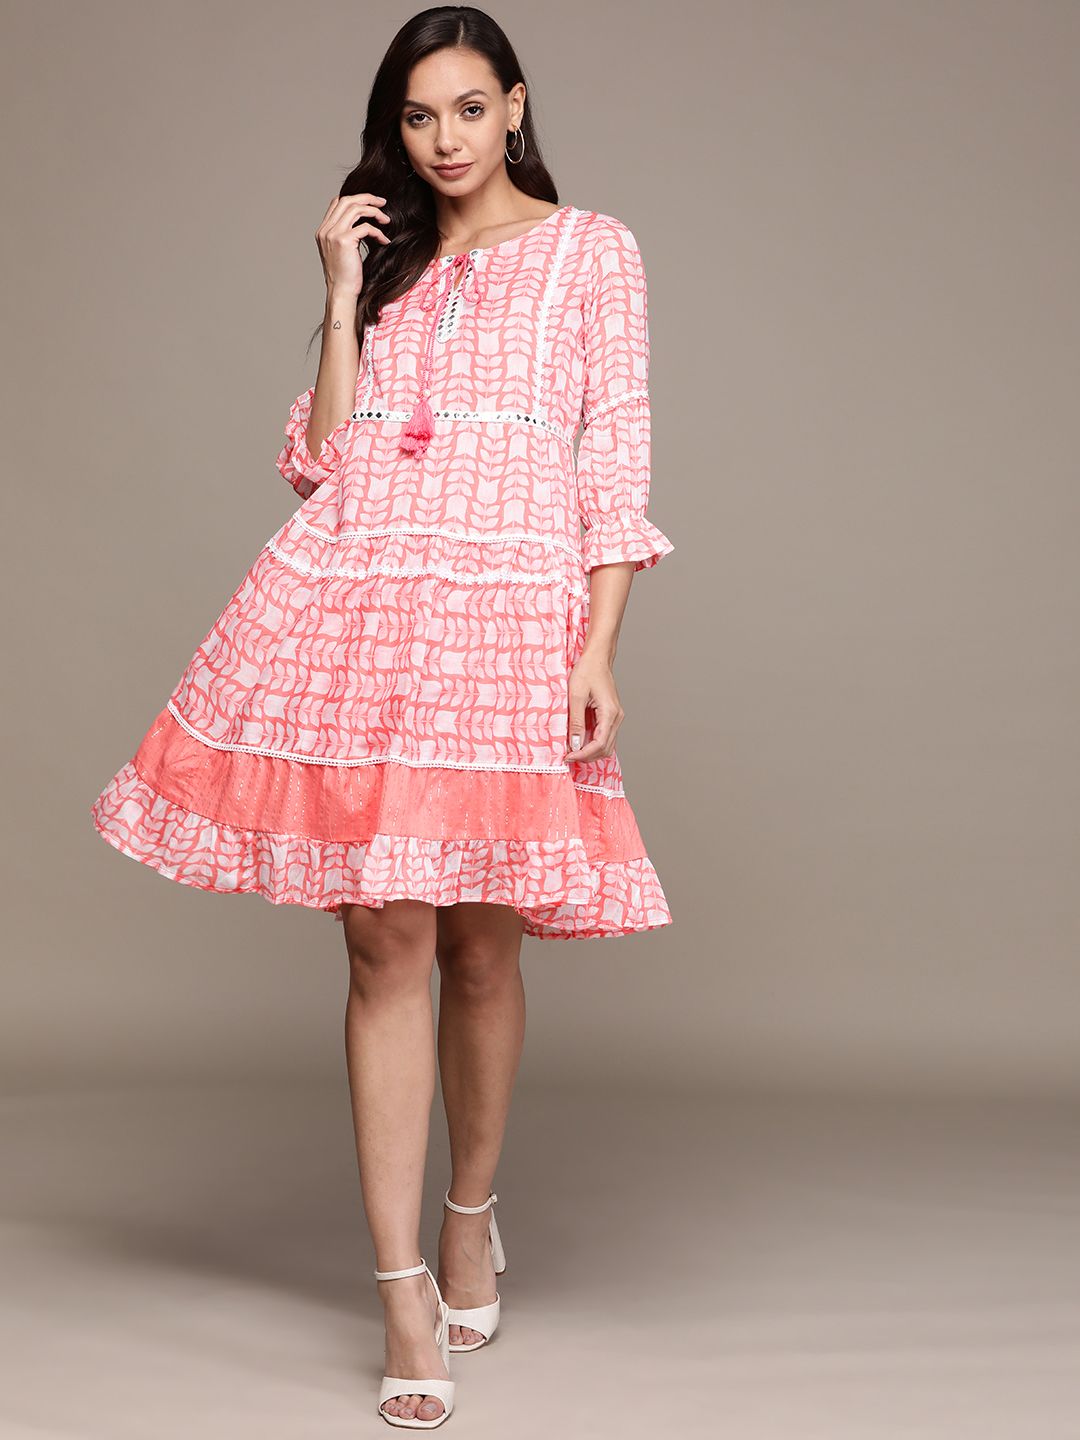 Ishin Coral Pink & White Ethnic Motifs Printed Embellished Tie-Up Neck Cotton A-Line Dress Price in India